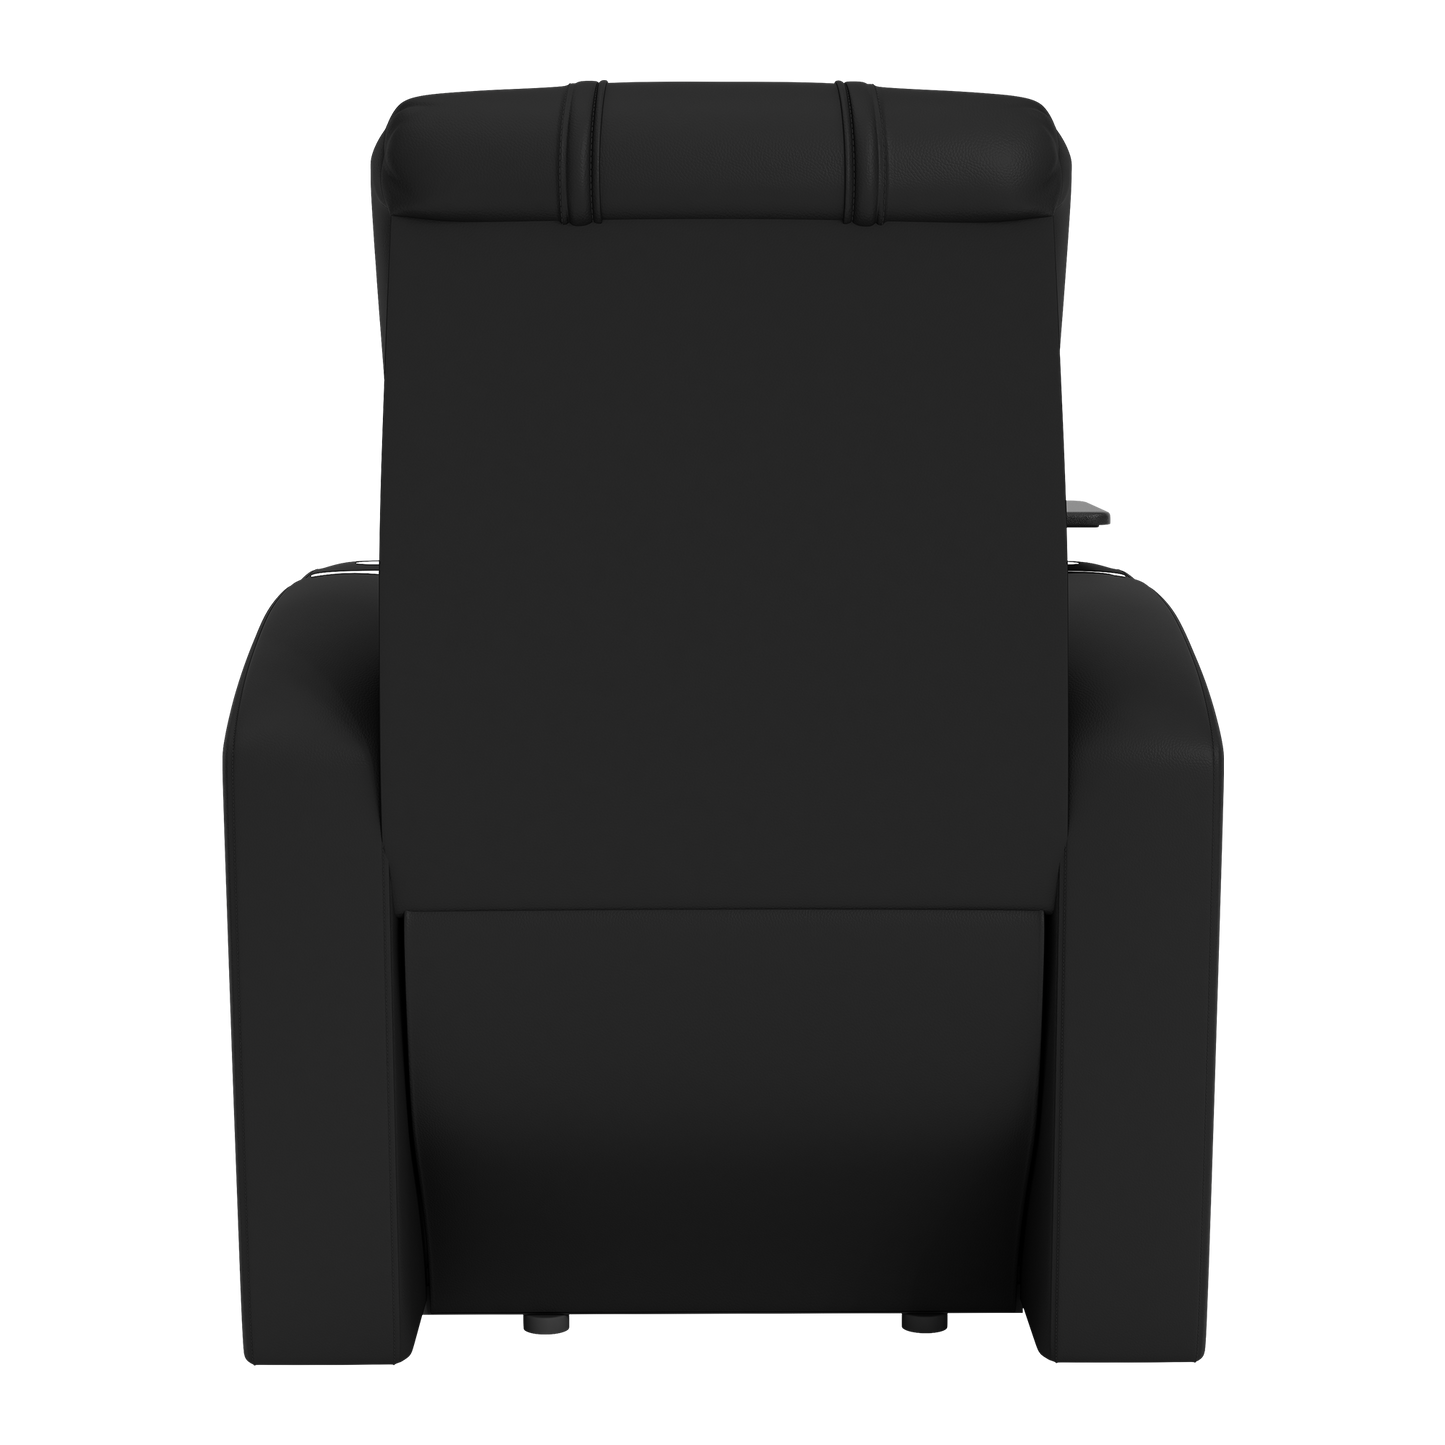 Stealth Power Plus Recliner with Toronto Raptors Primary 2019 Champions  Logo